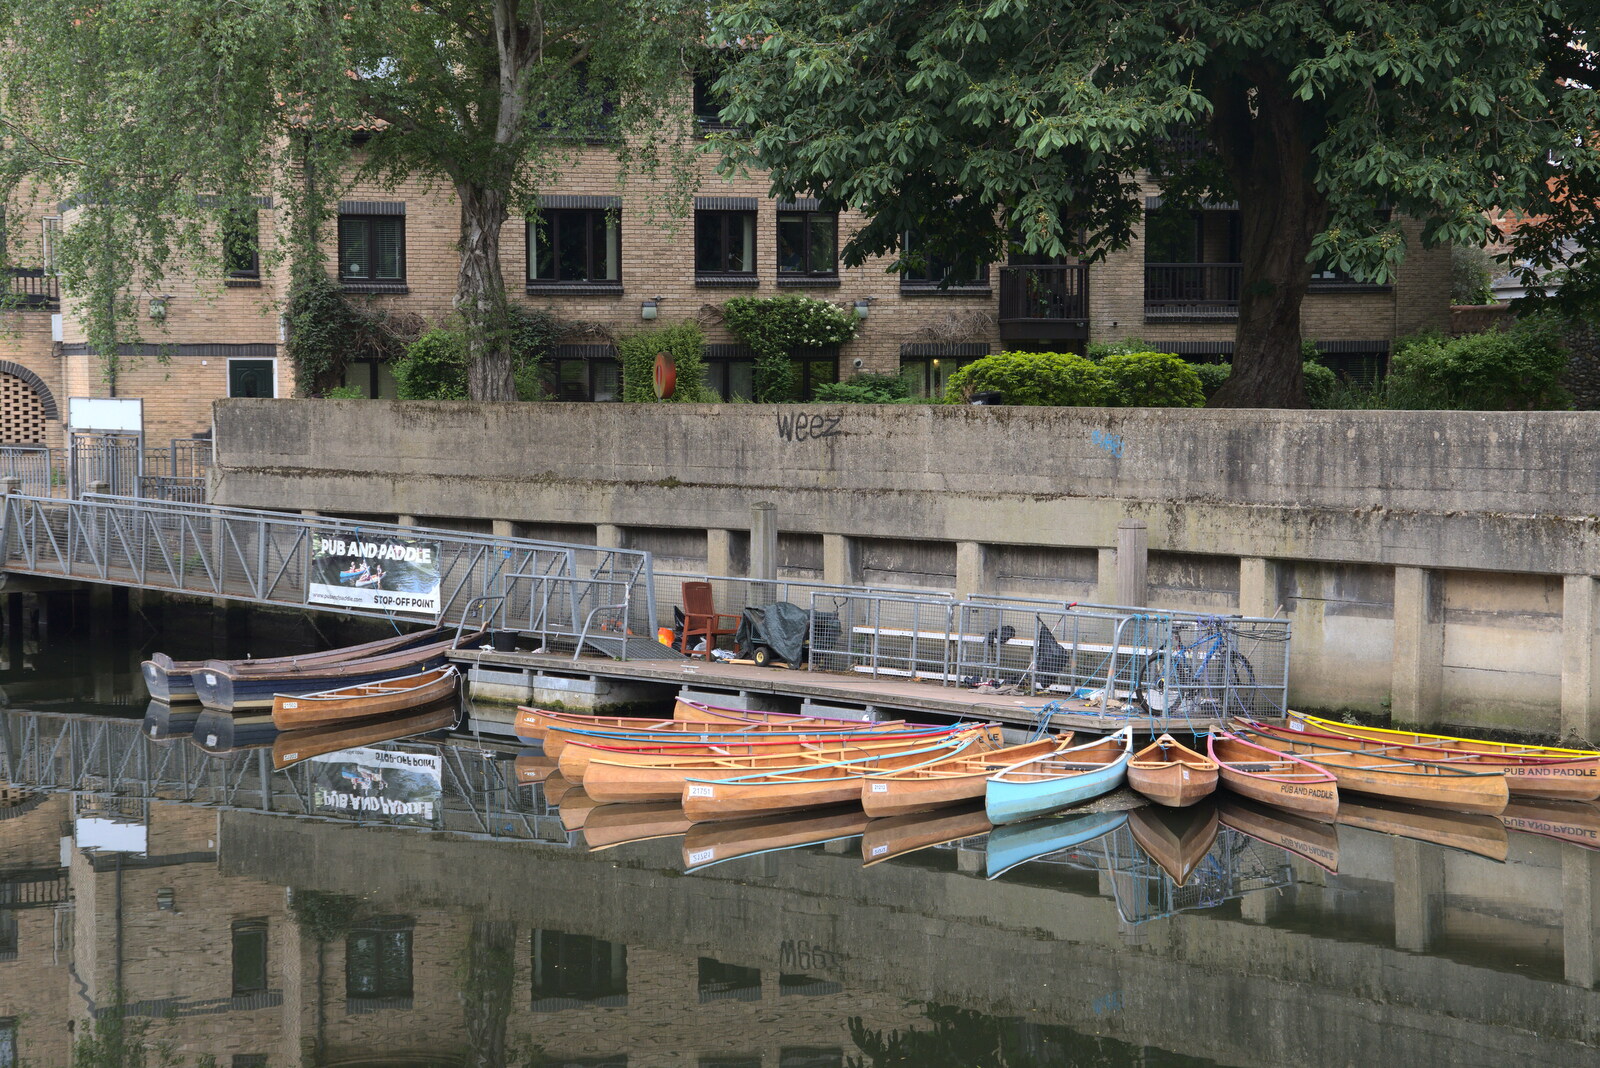 Pub and Paddle canoes moored up on the Wensum from Discovering the Hidden City: Norwich, Norfolk - 23rd May 2022